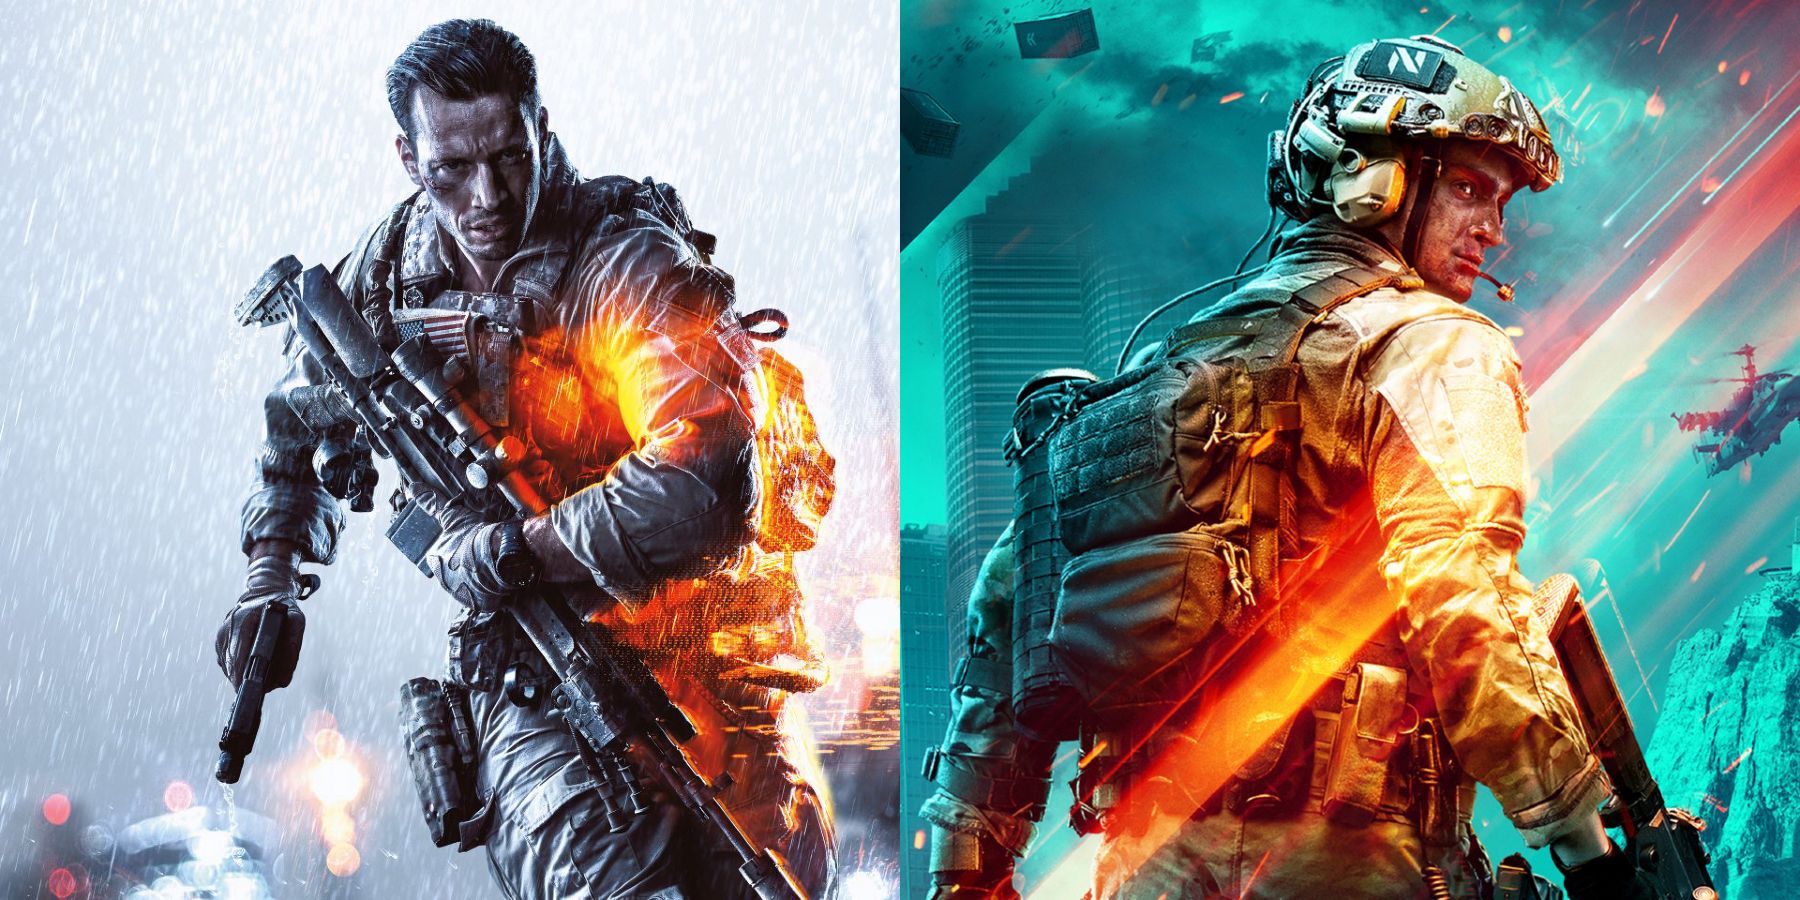 Battlefield 4's Resurgence is a Good Sign for BF2042